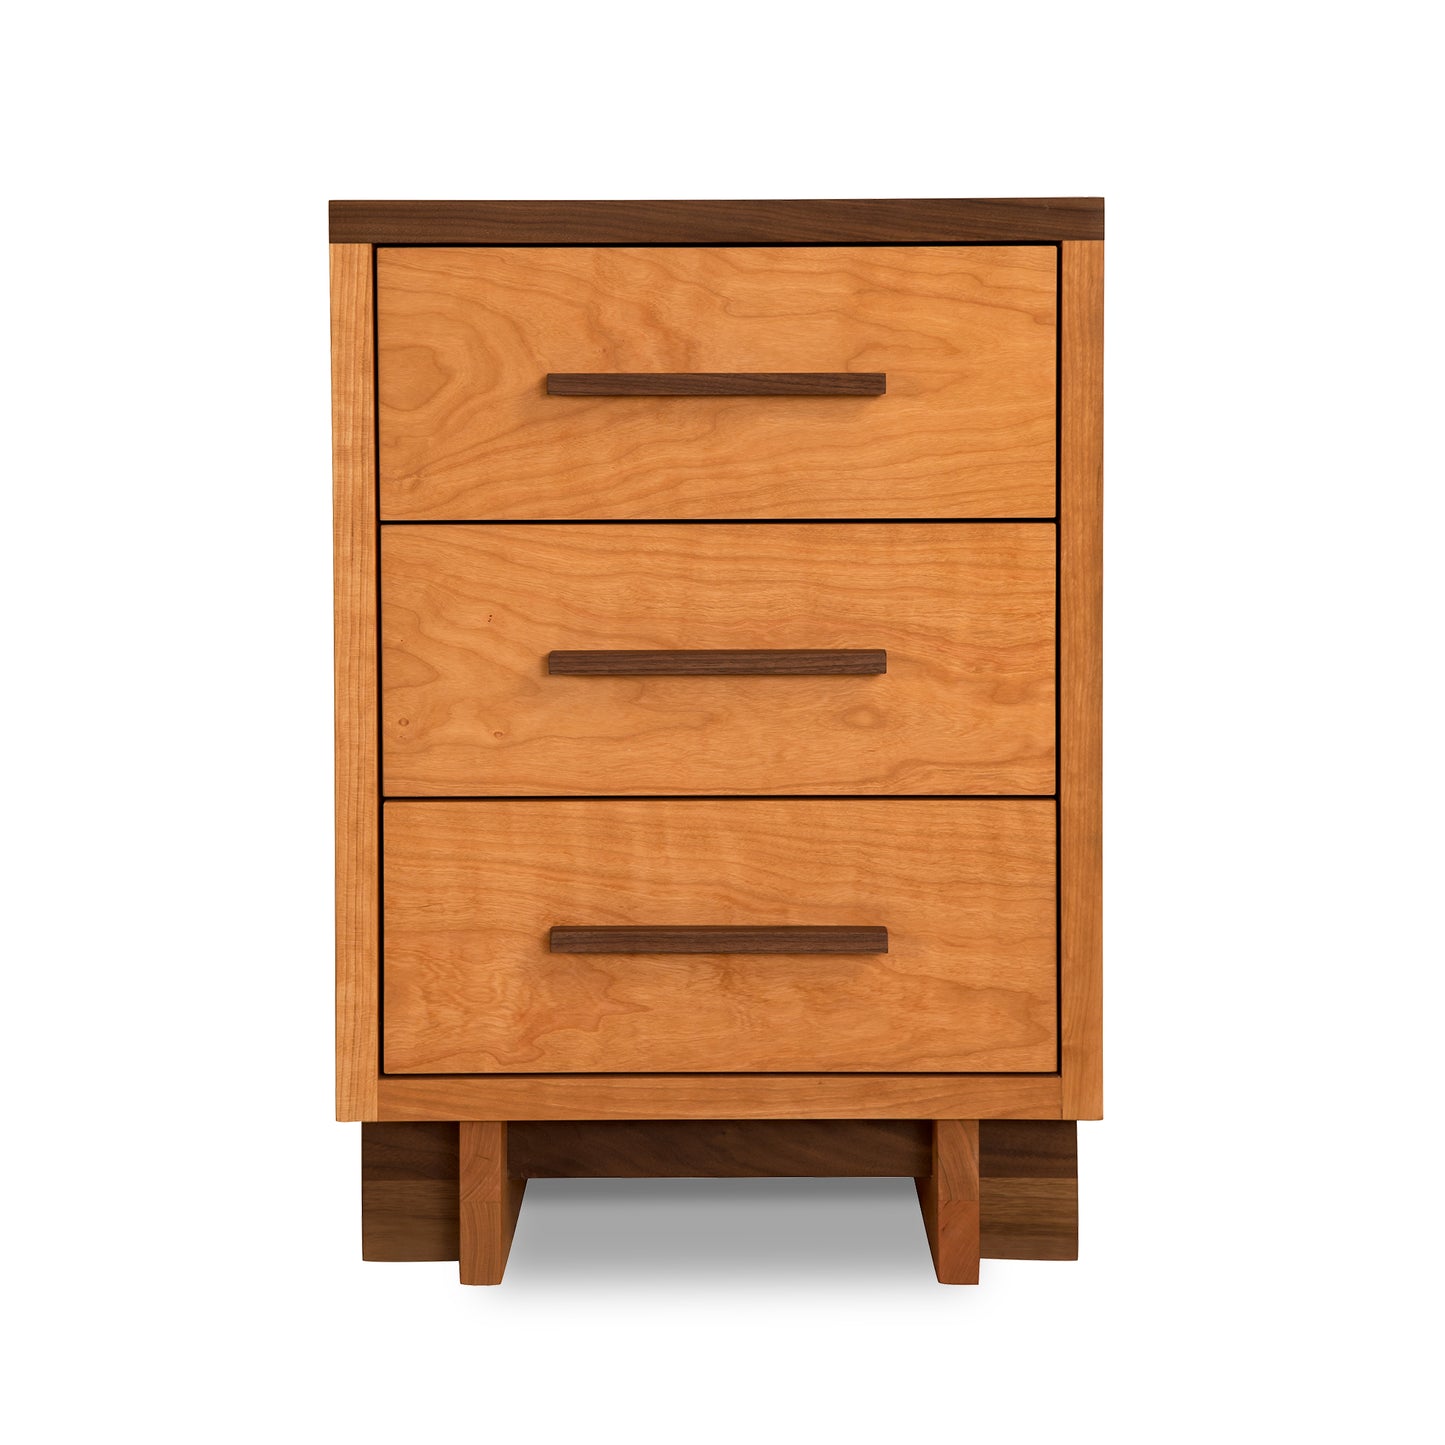 A Modern American 3-Drawer Nightstand perfect for a luxury bedroom, featuring three spacious drawers and crafted from high-quality wood by Vermont Furniture Designs.